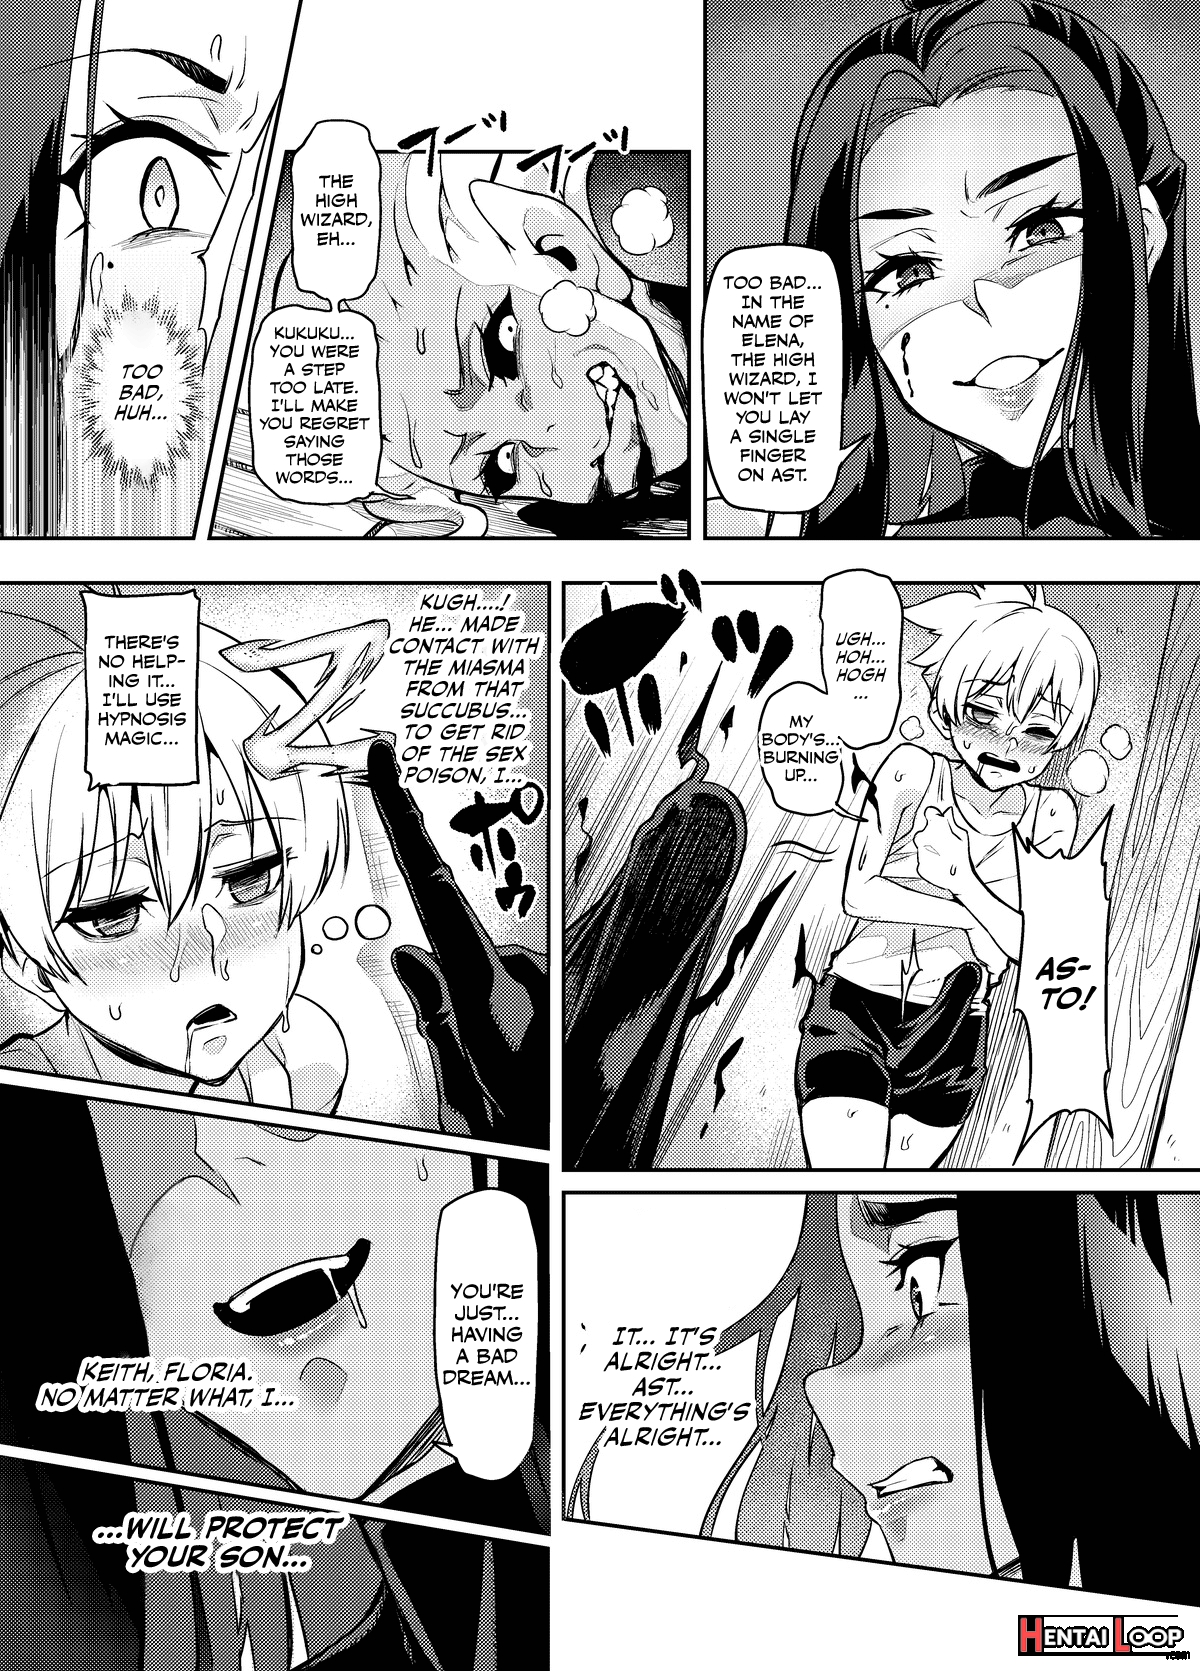 High Wizard Elena ~the Witch Who Fell In Love With The Child Entrusted To Her By Her Past Sweetheart~ Chapter 1, 3-5 page 7